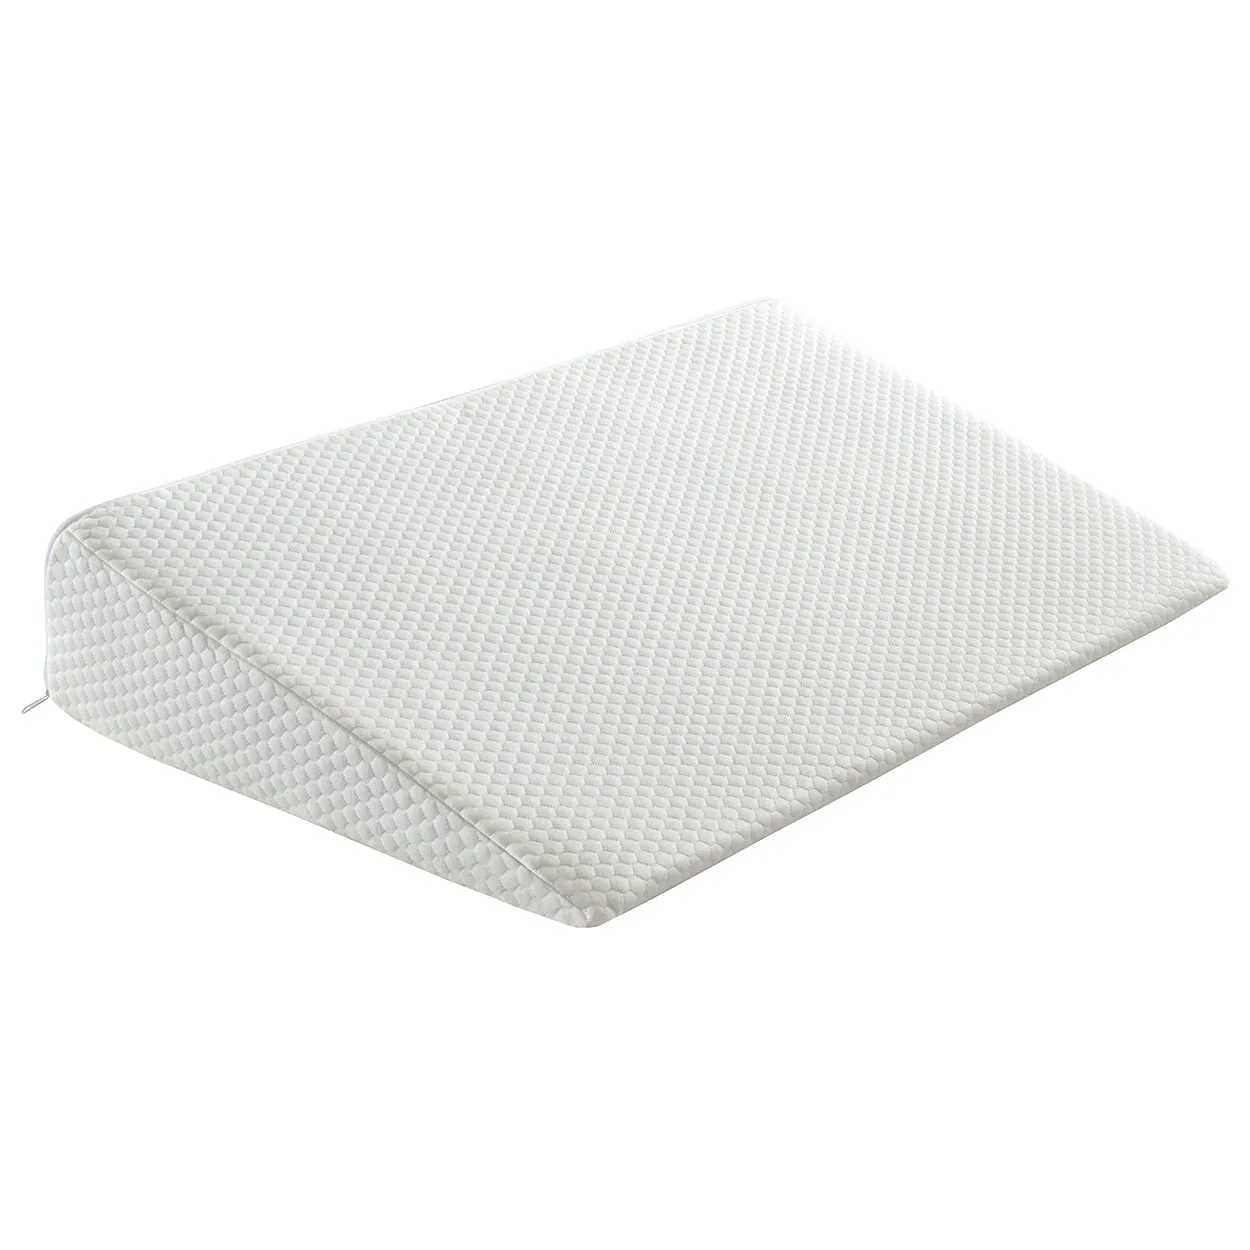 Pillow Support fed.extra cc cm.45x75x12/0